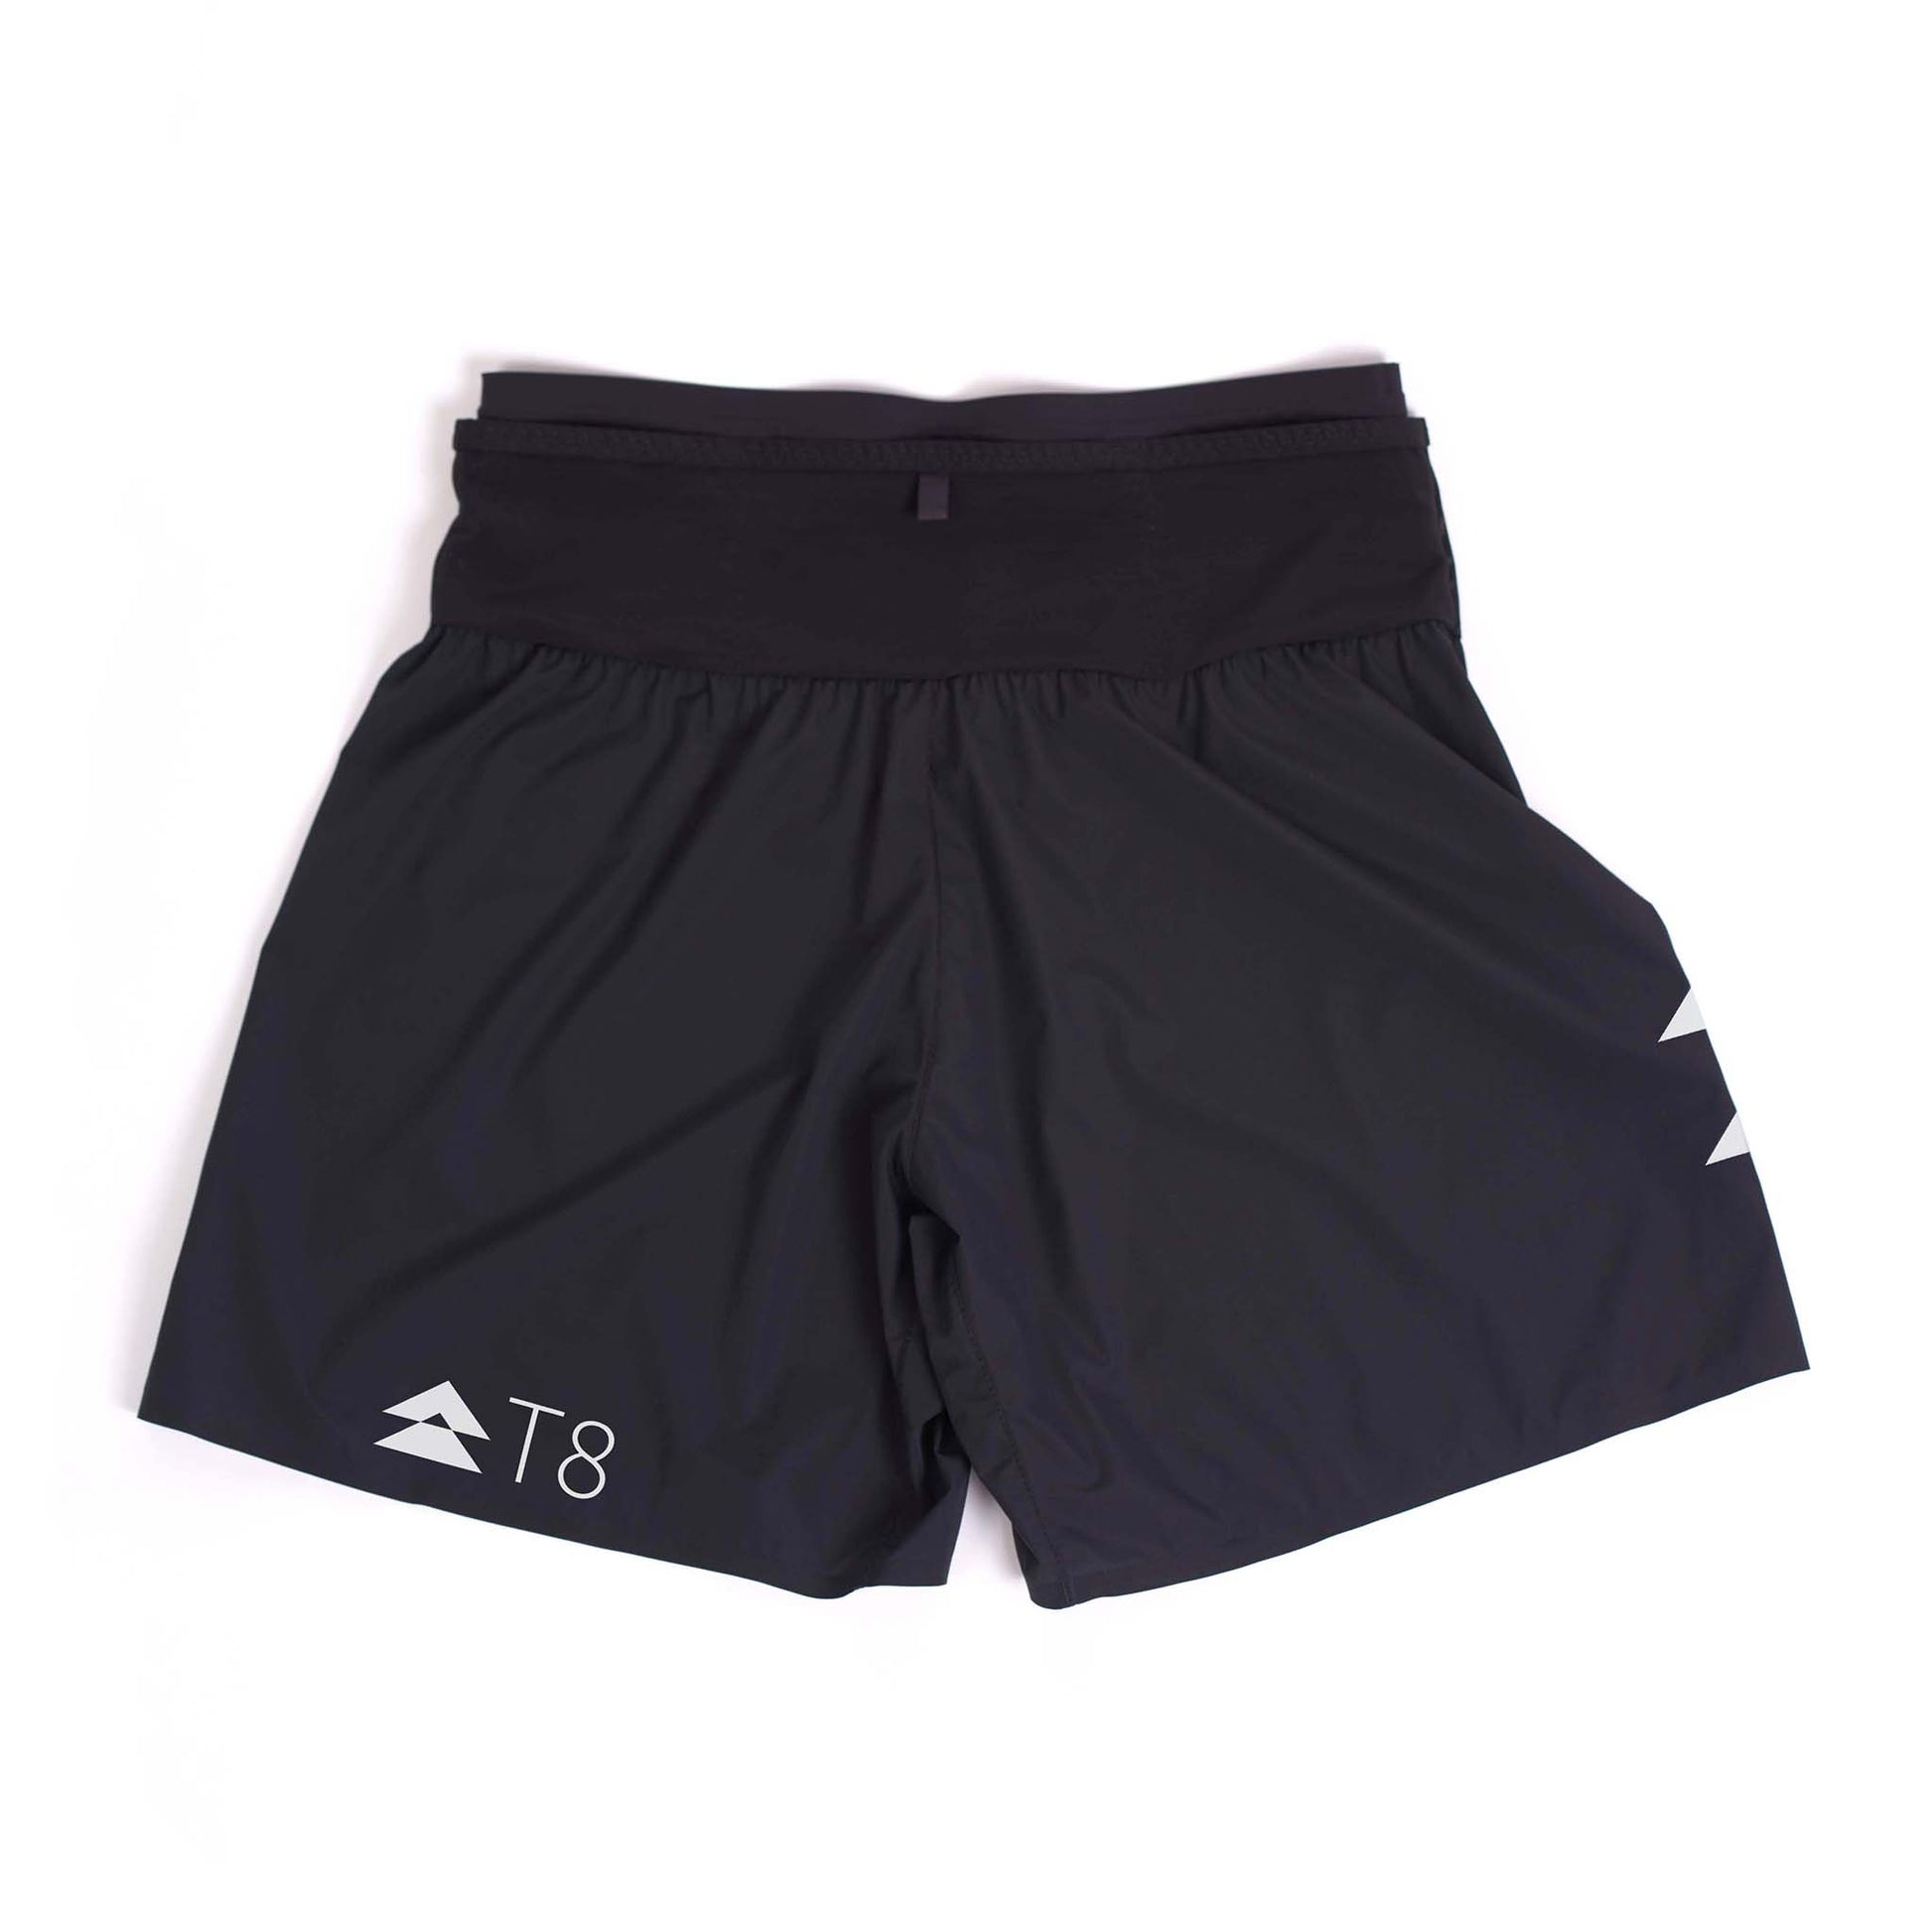 FBT Shorts with Inner Tights #838